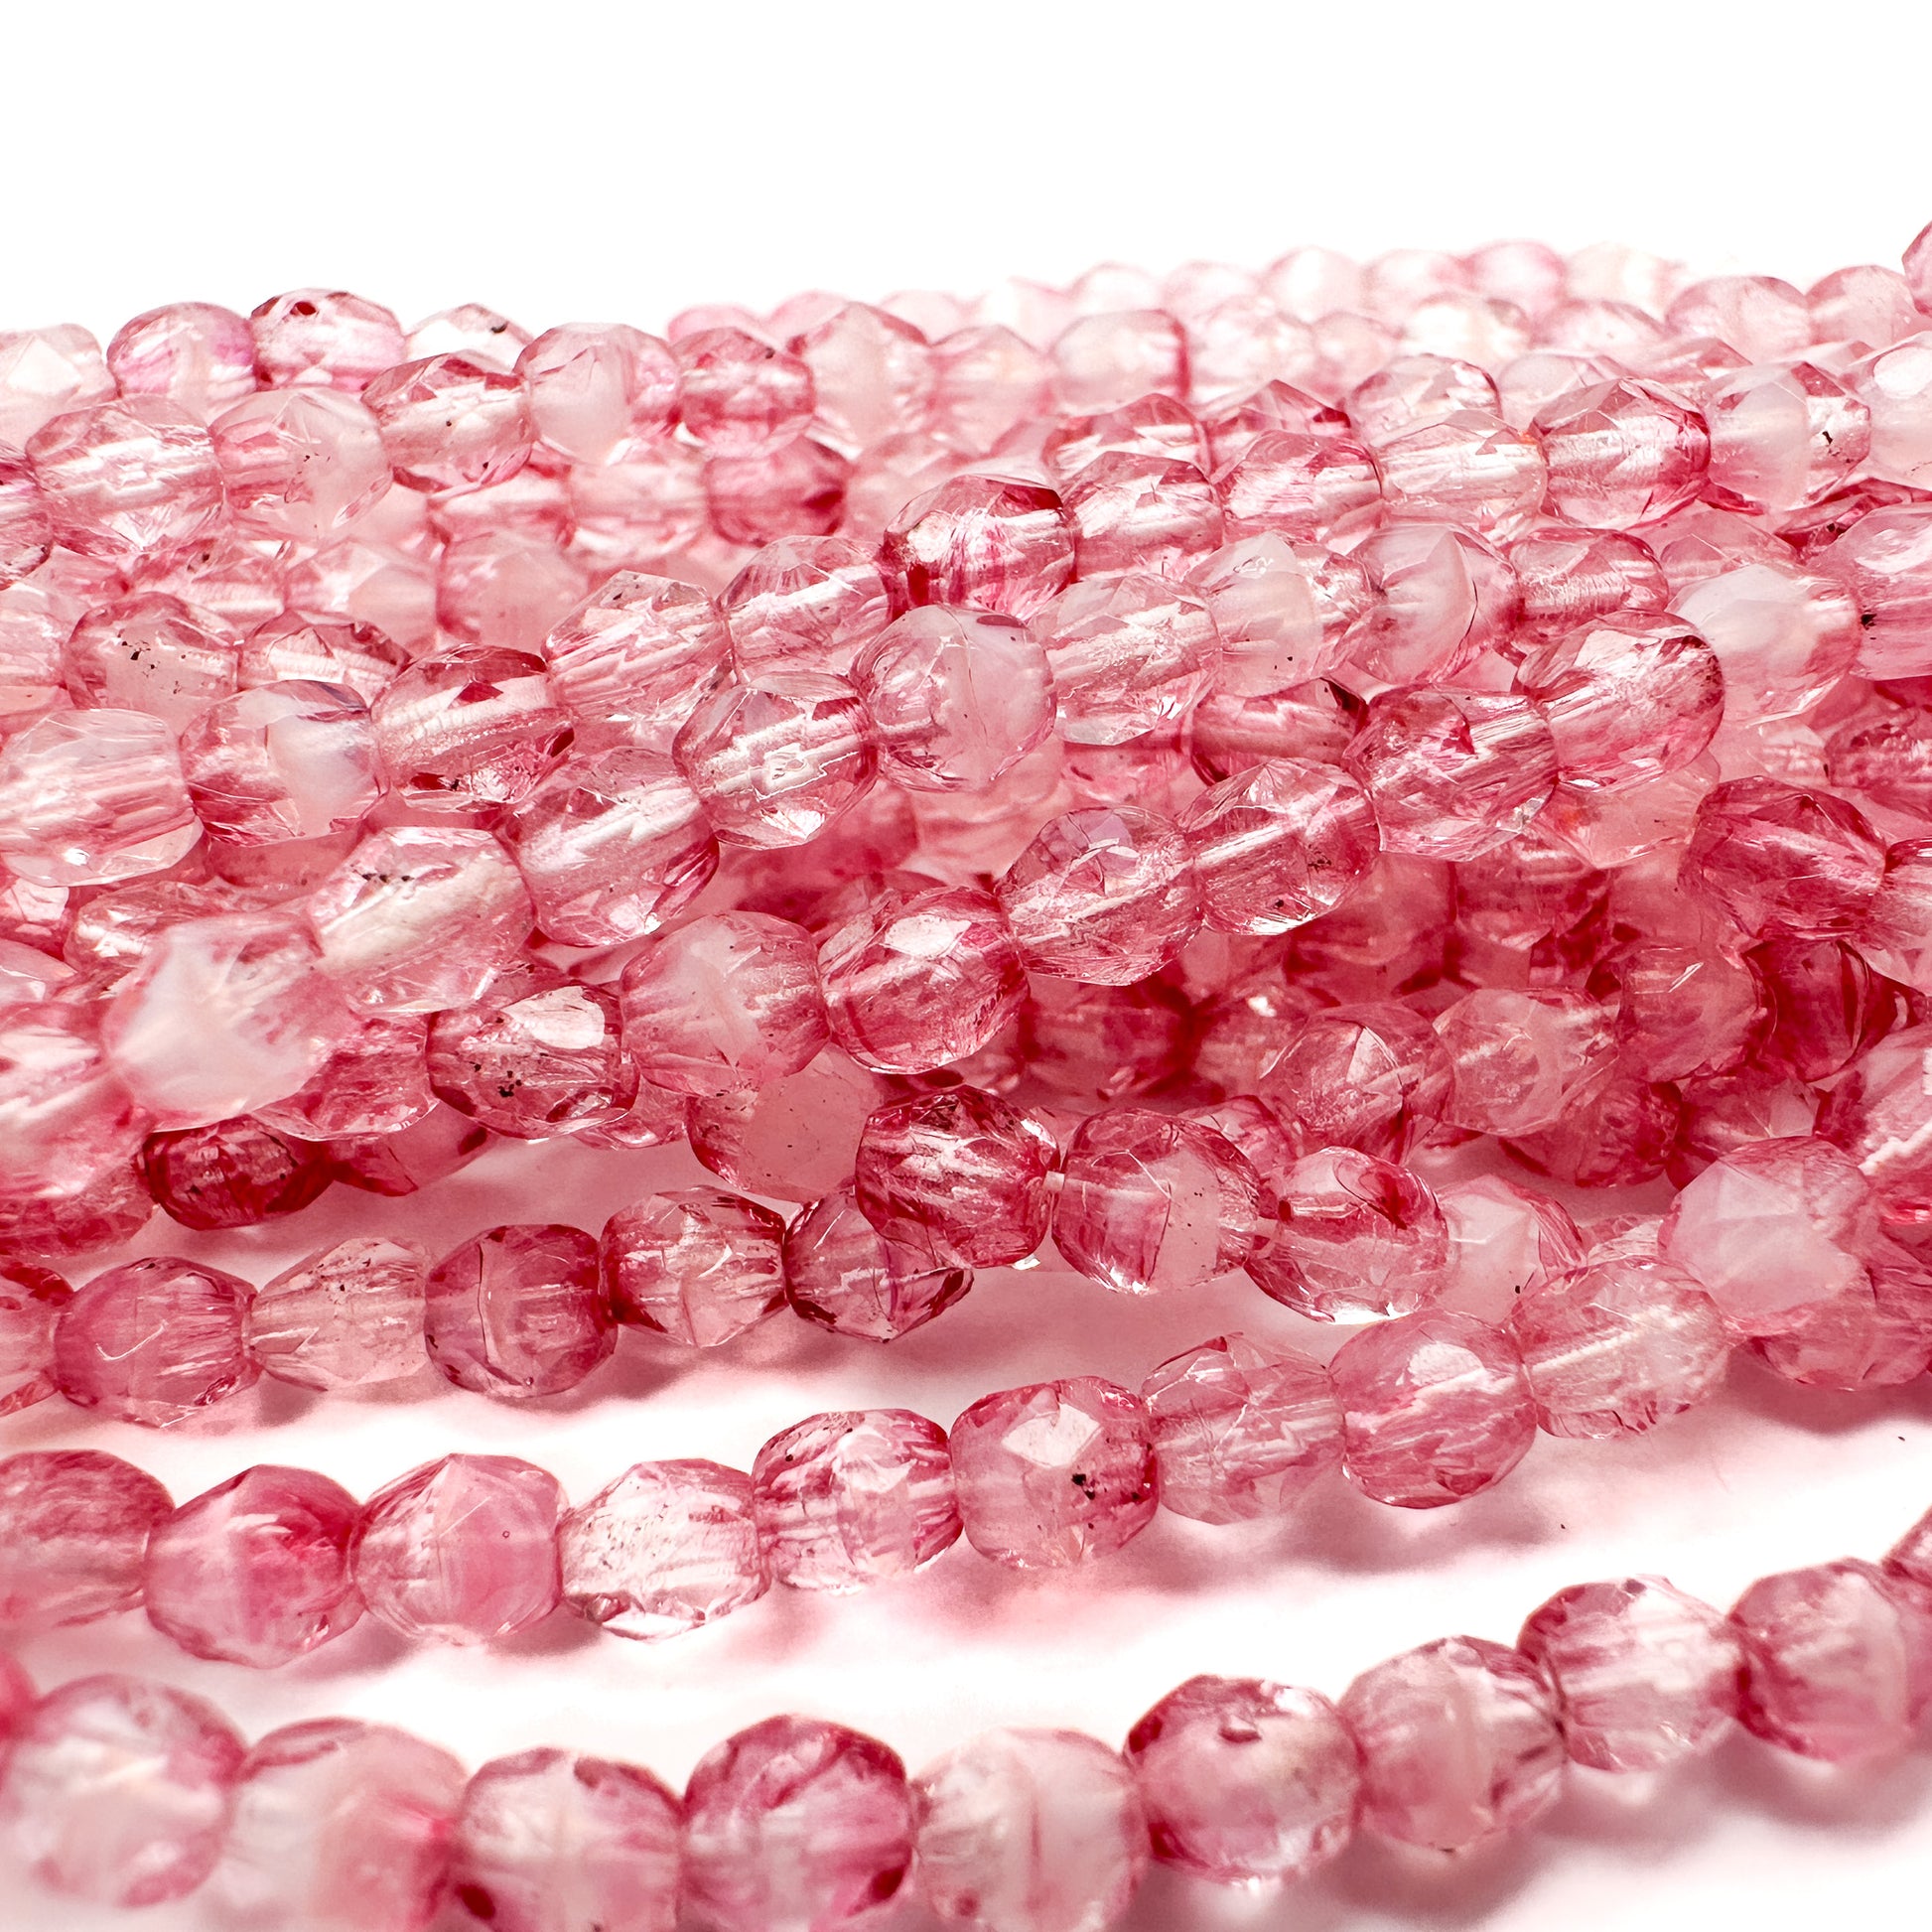 Pink Crystal White Mix Transparent 4mm Faceted Glass Bead - 50 pcs.-The Bead Gallery Honolulu